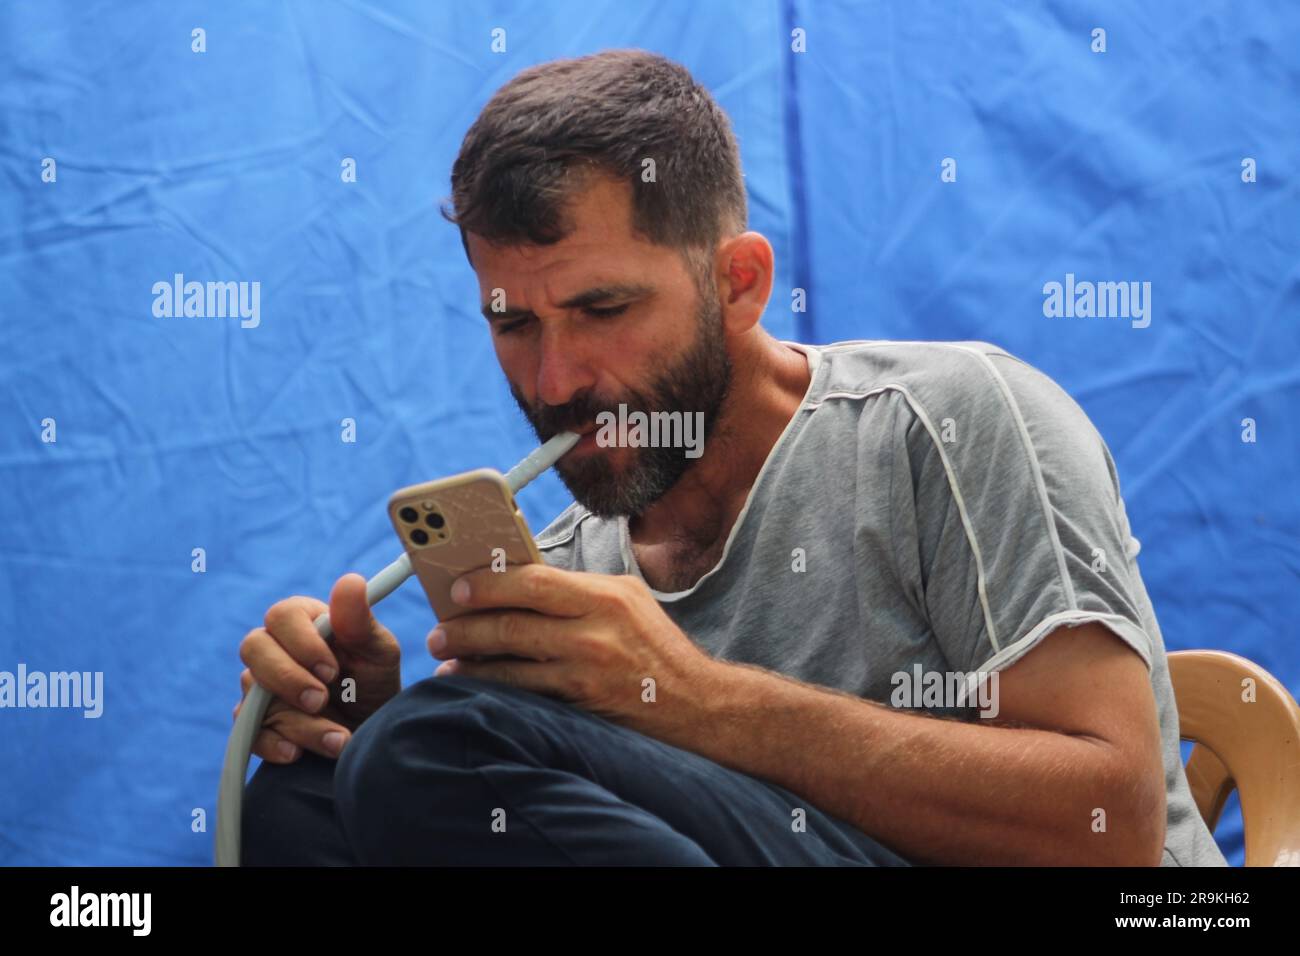 Man spending time on internet watching video in social media and hookah smoking. Leisure time concept idea. Stock Photo